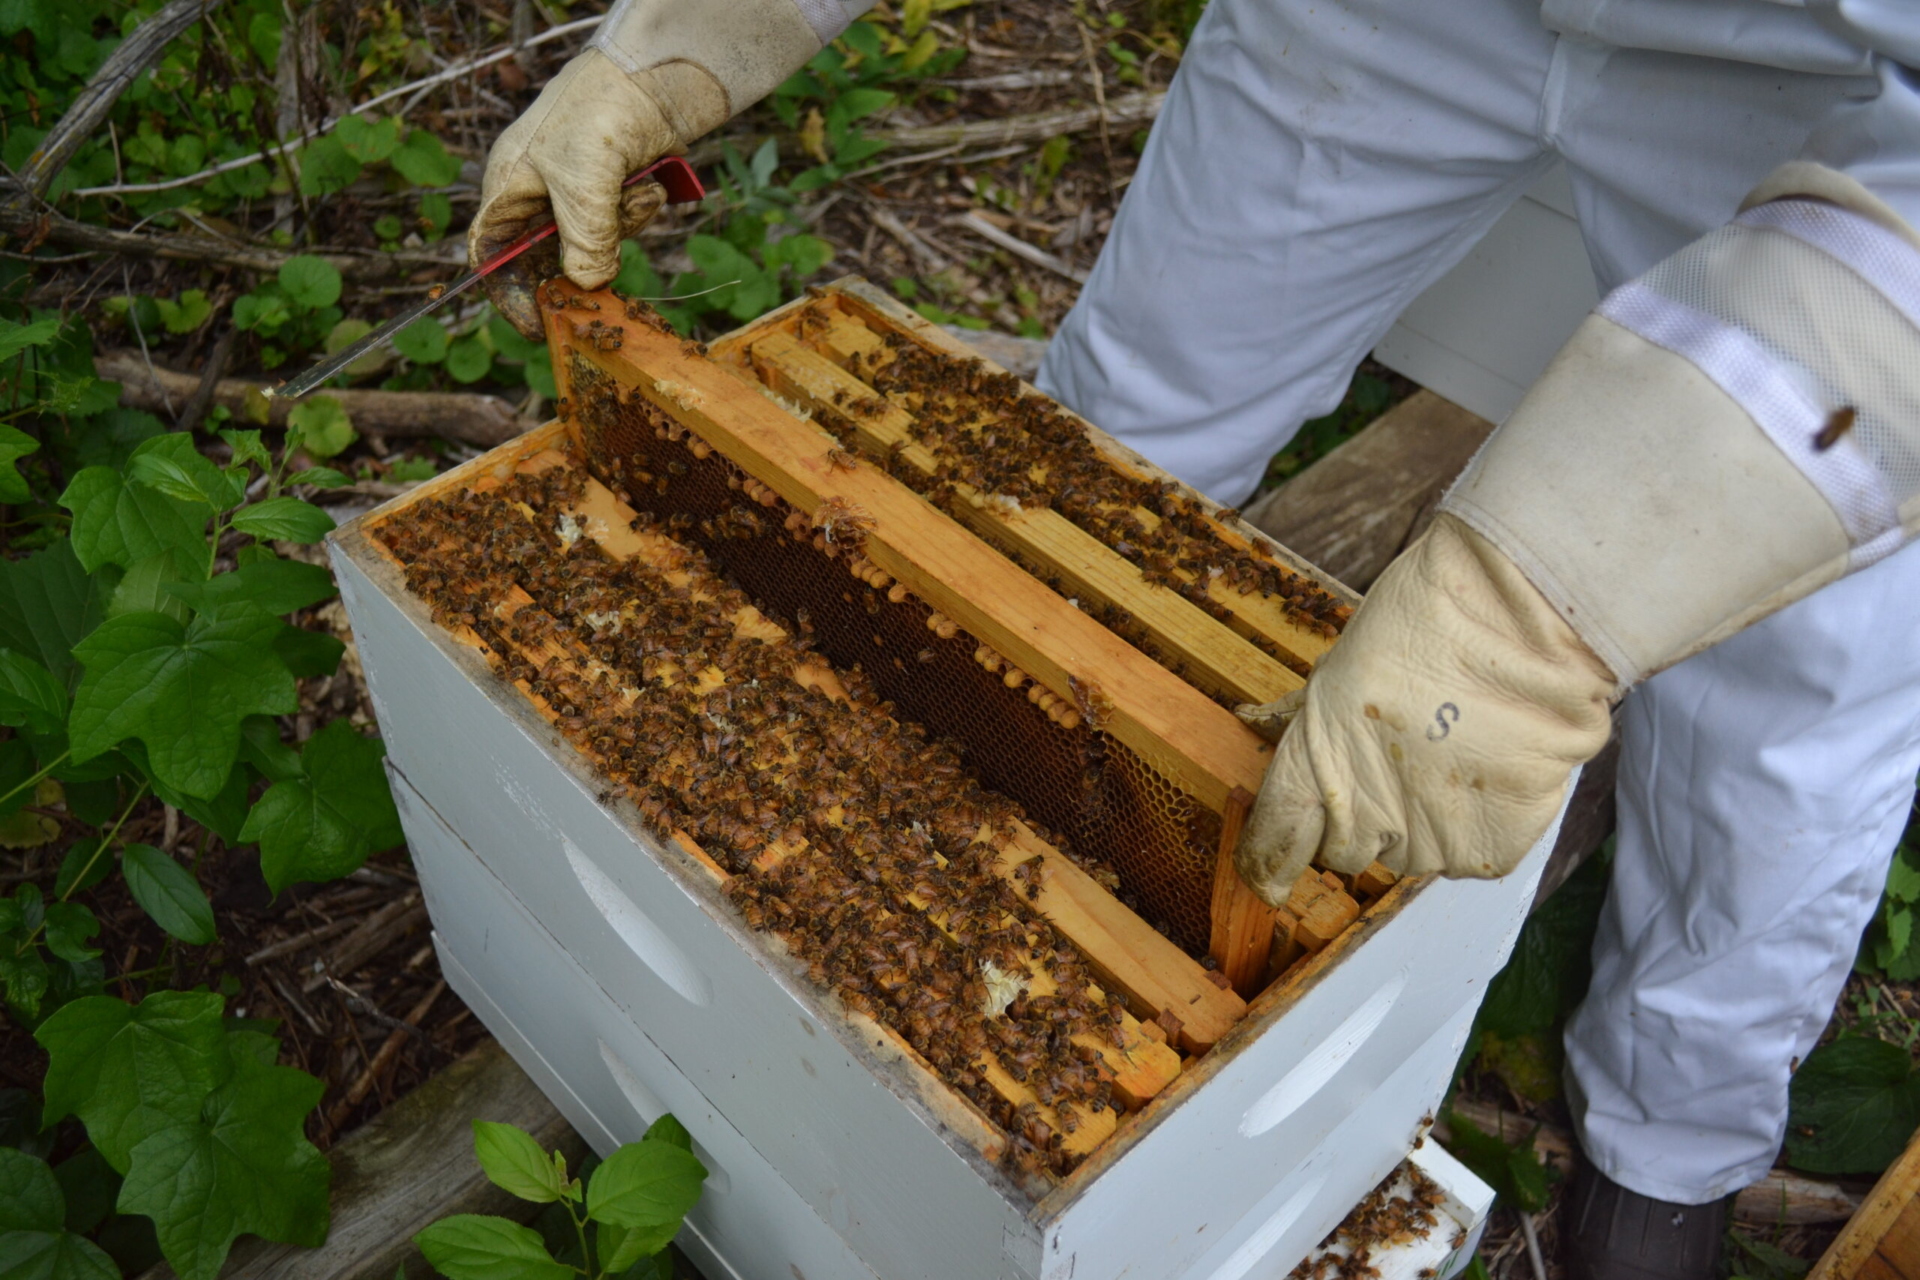 A beekeeper dressed in protective gear removes honeycomb from an Arboretum bee hive.